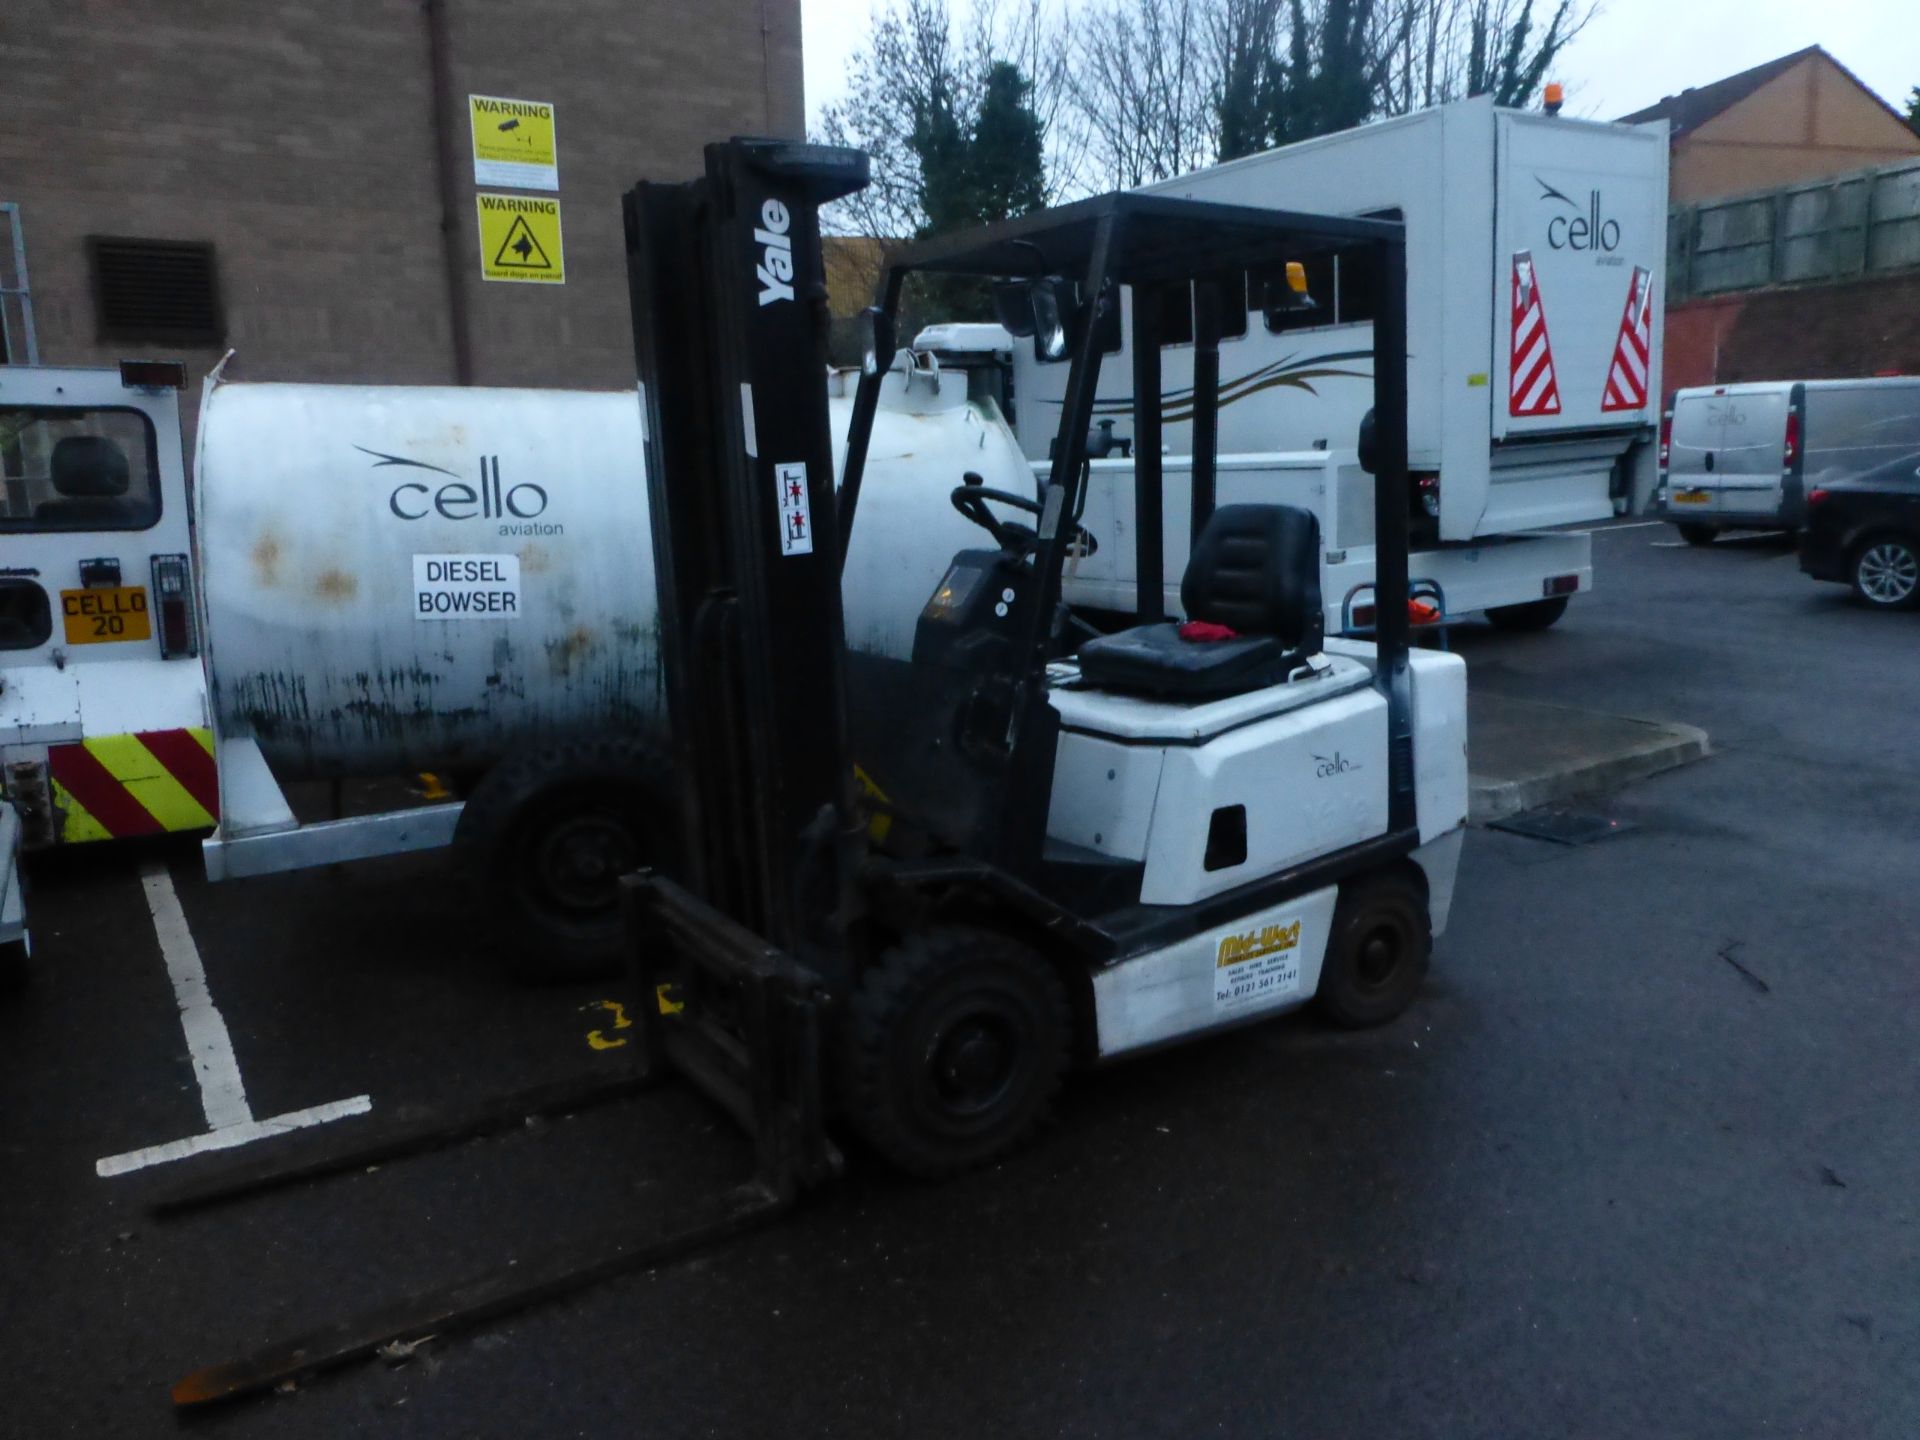 Yale GDP20AF 1540Kg Diesel Driven Counterbalance Fork Lift Truck, Serial No: E810B02680S, 12096